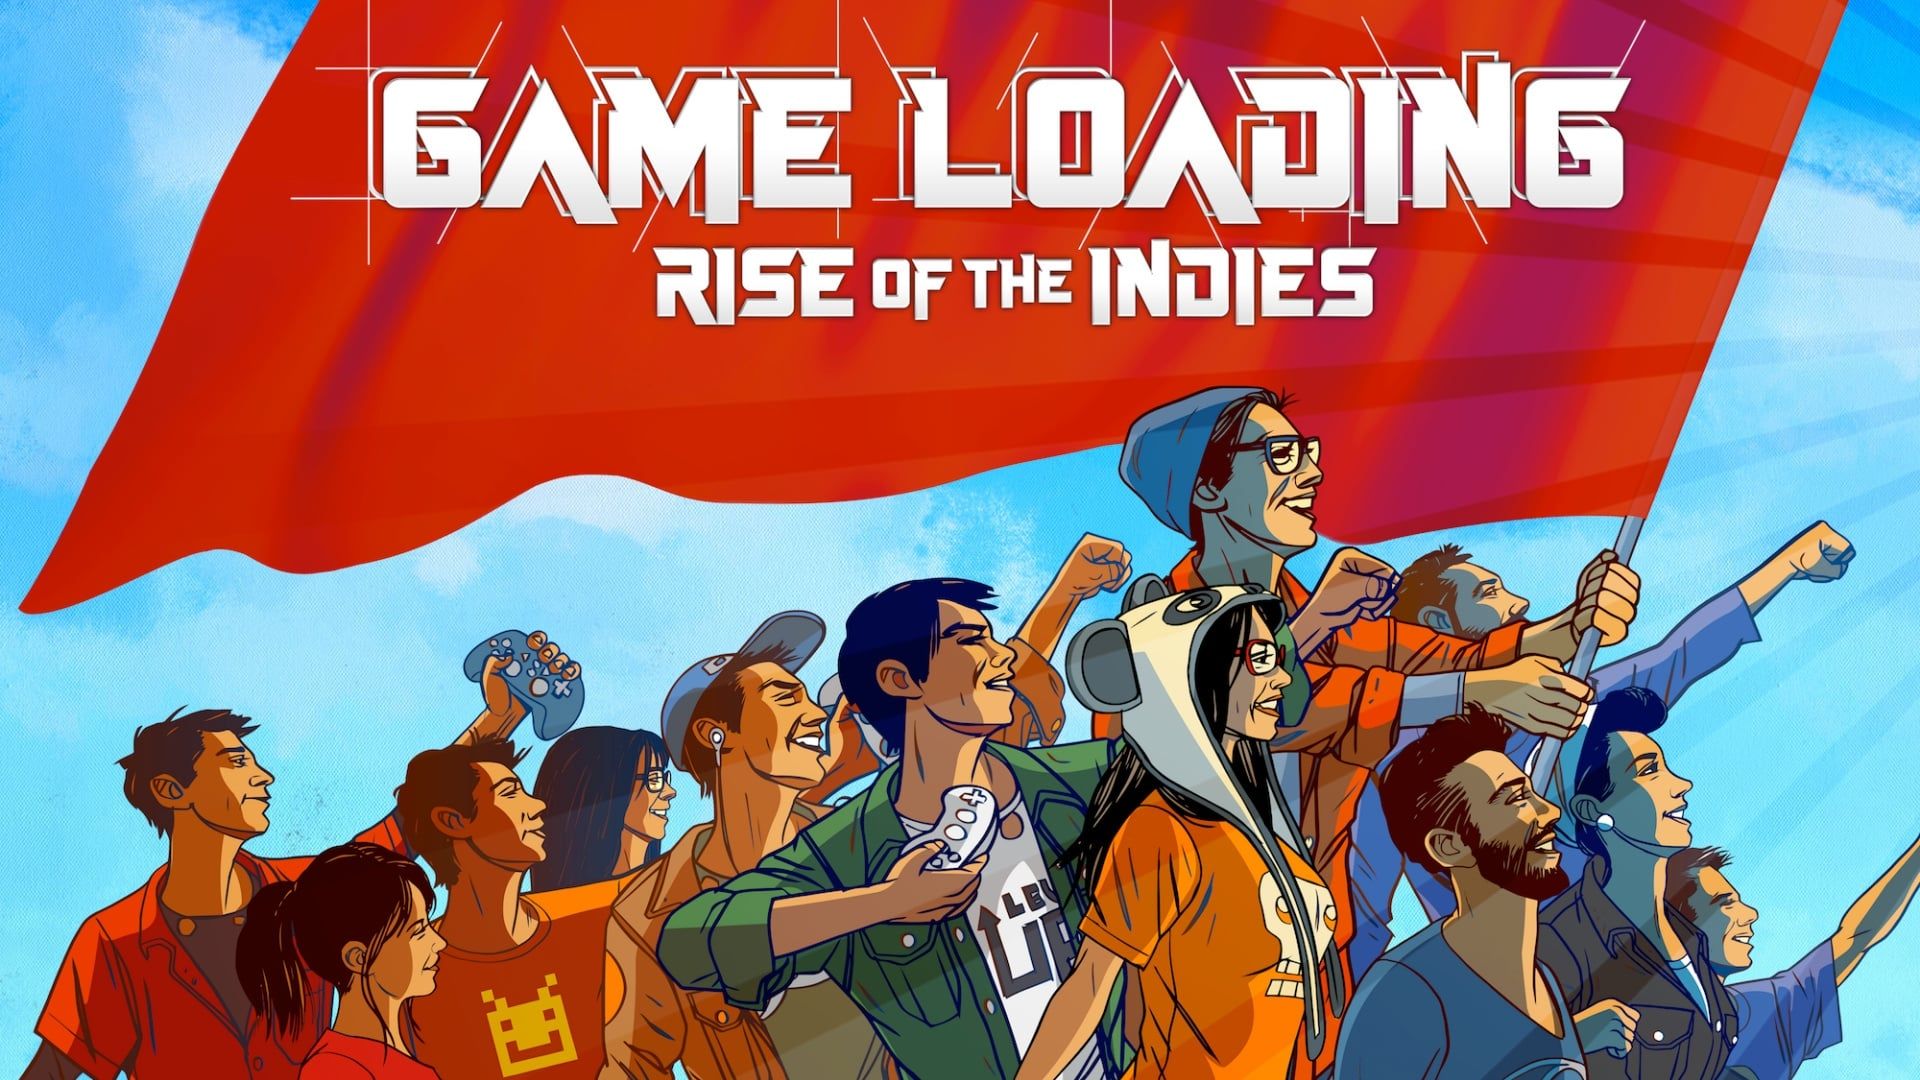 Game Loading: Rise of the Indies background